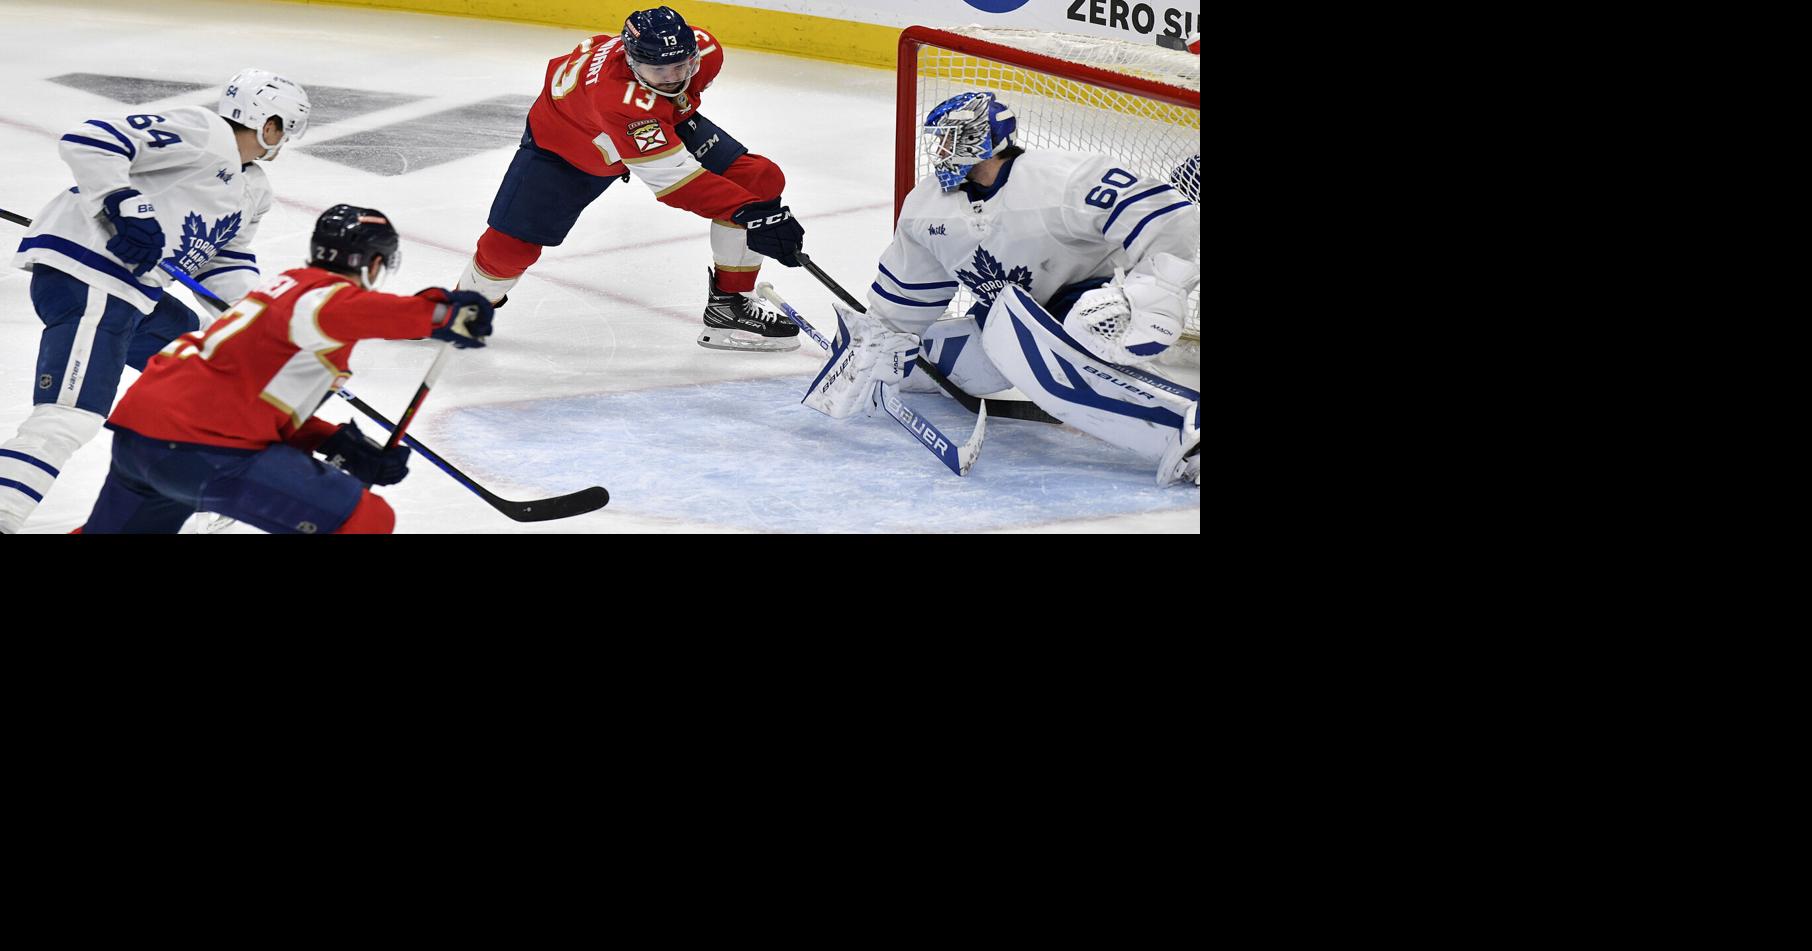 Devils beat Maple Leafs for 11th straight win - ESPN